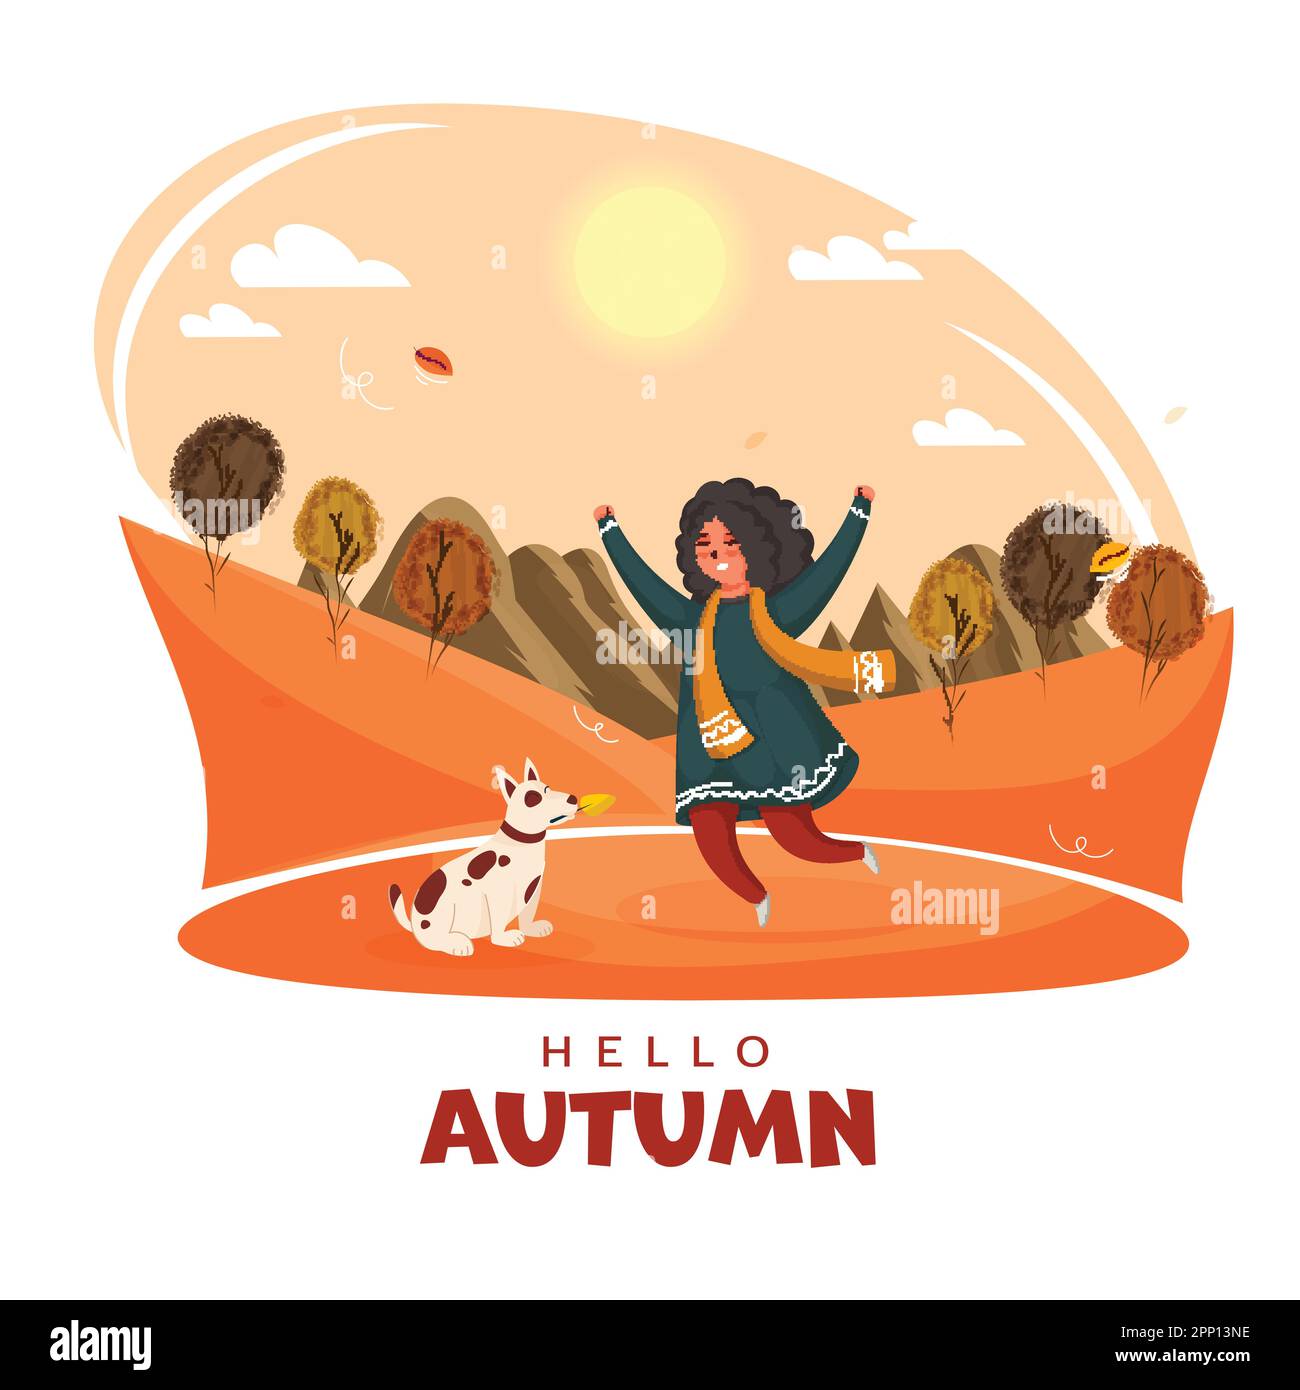 Fall Season Sunlight Background With Cheerful Young Girl And Dog Illustration For Hello Autumn Concept. Stock Vector